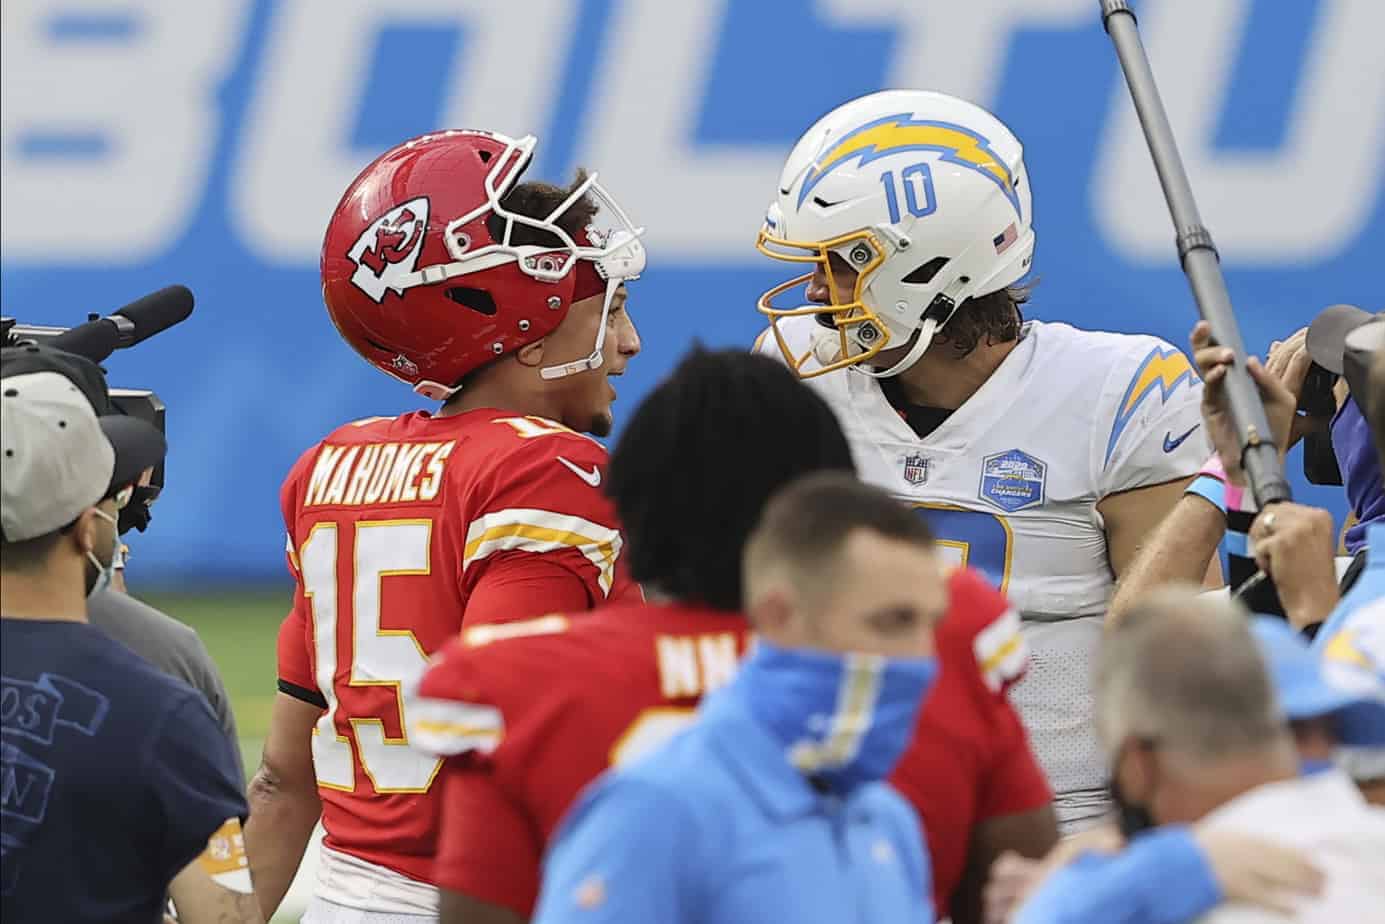 Kansas City Chiefs quarterback Patrick Mahomes doesn't sound all too concerned about the rise of Chargers quarterback Justin Herbert